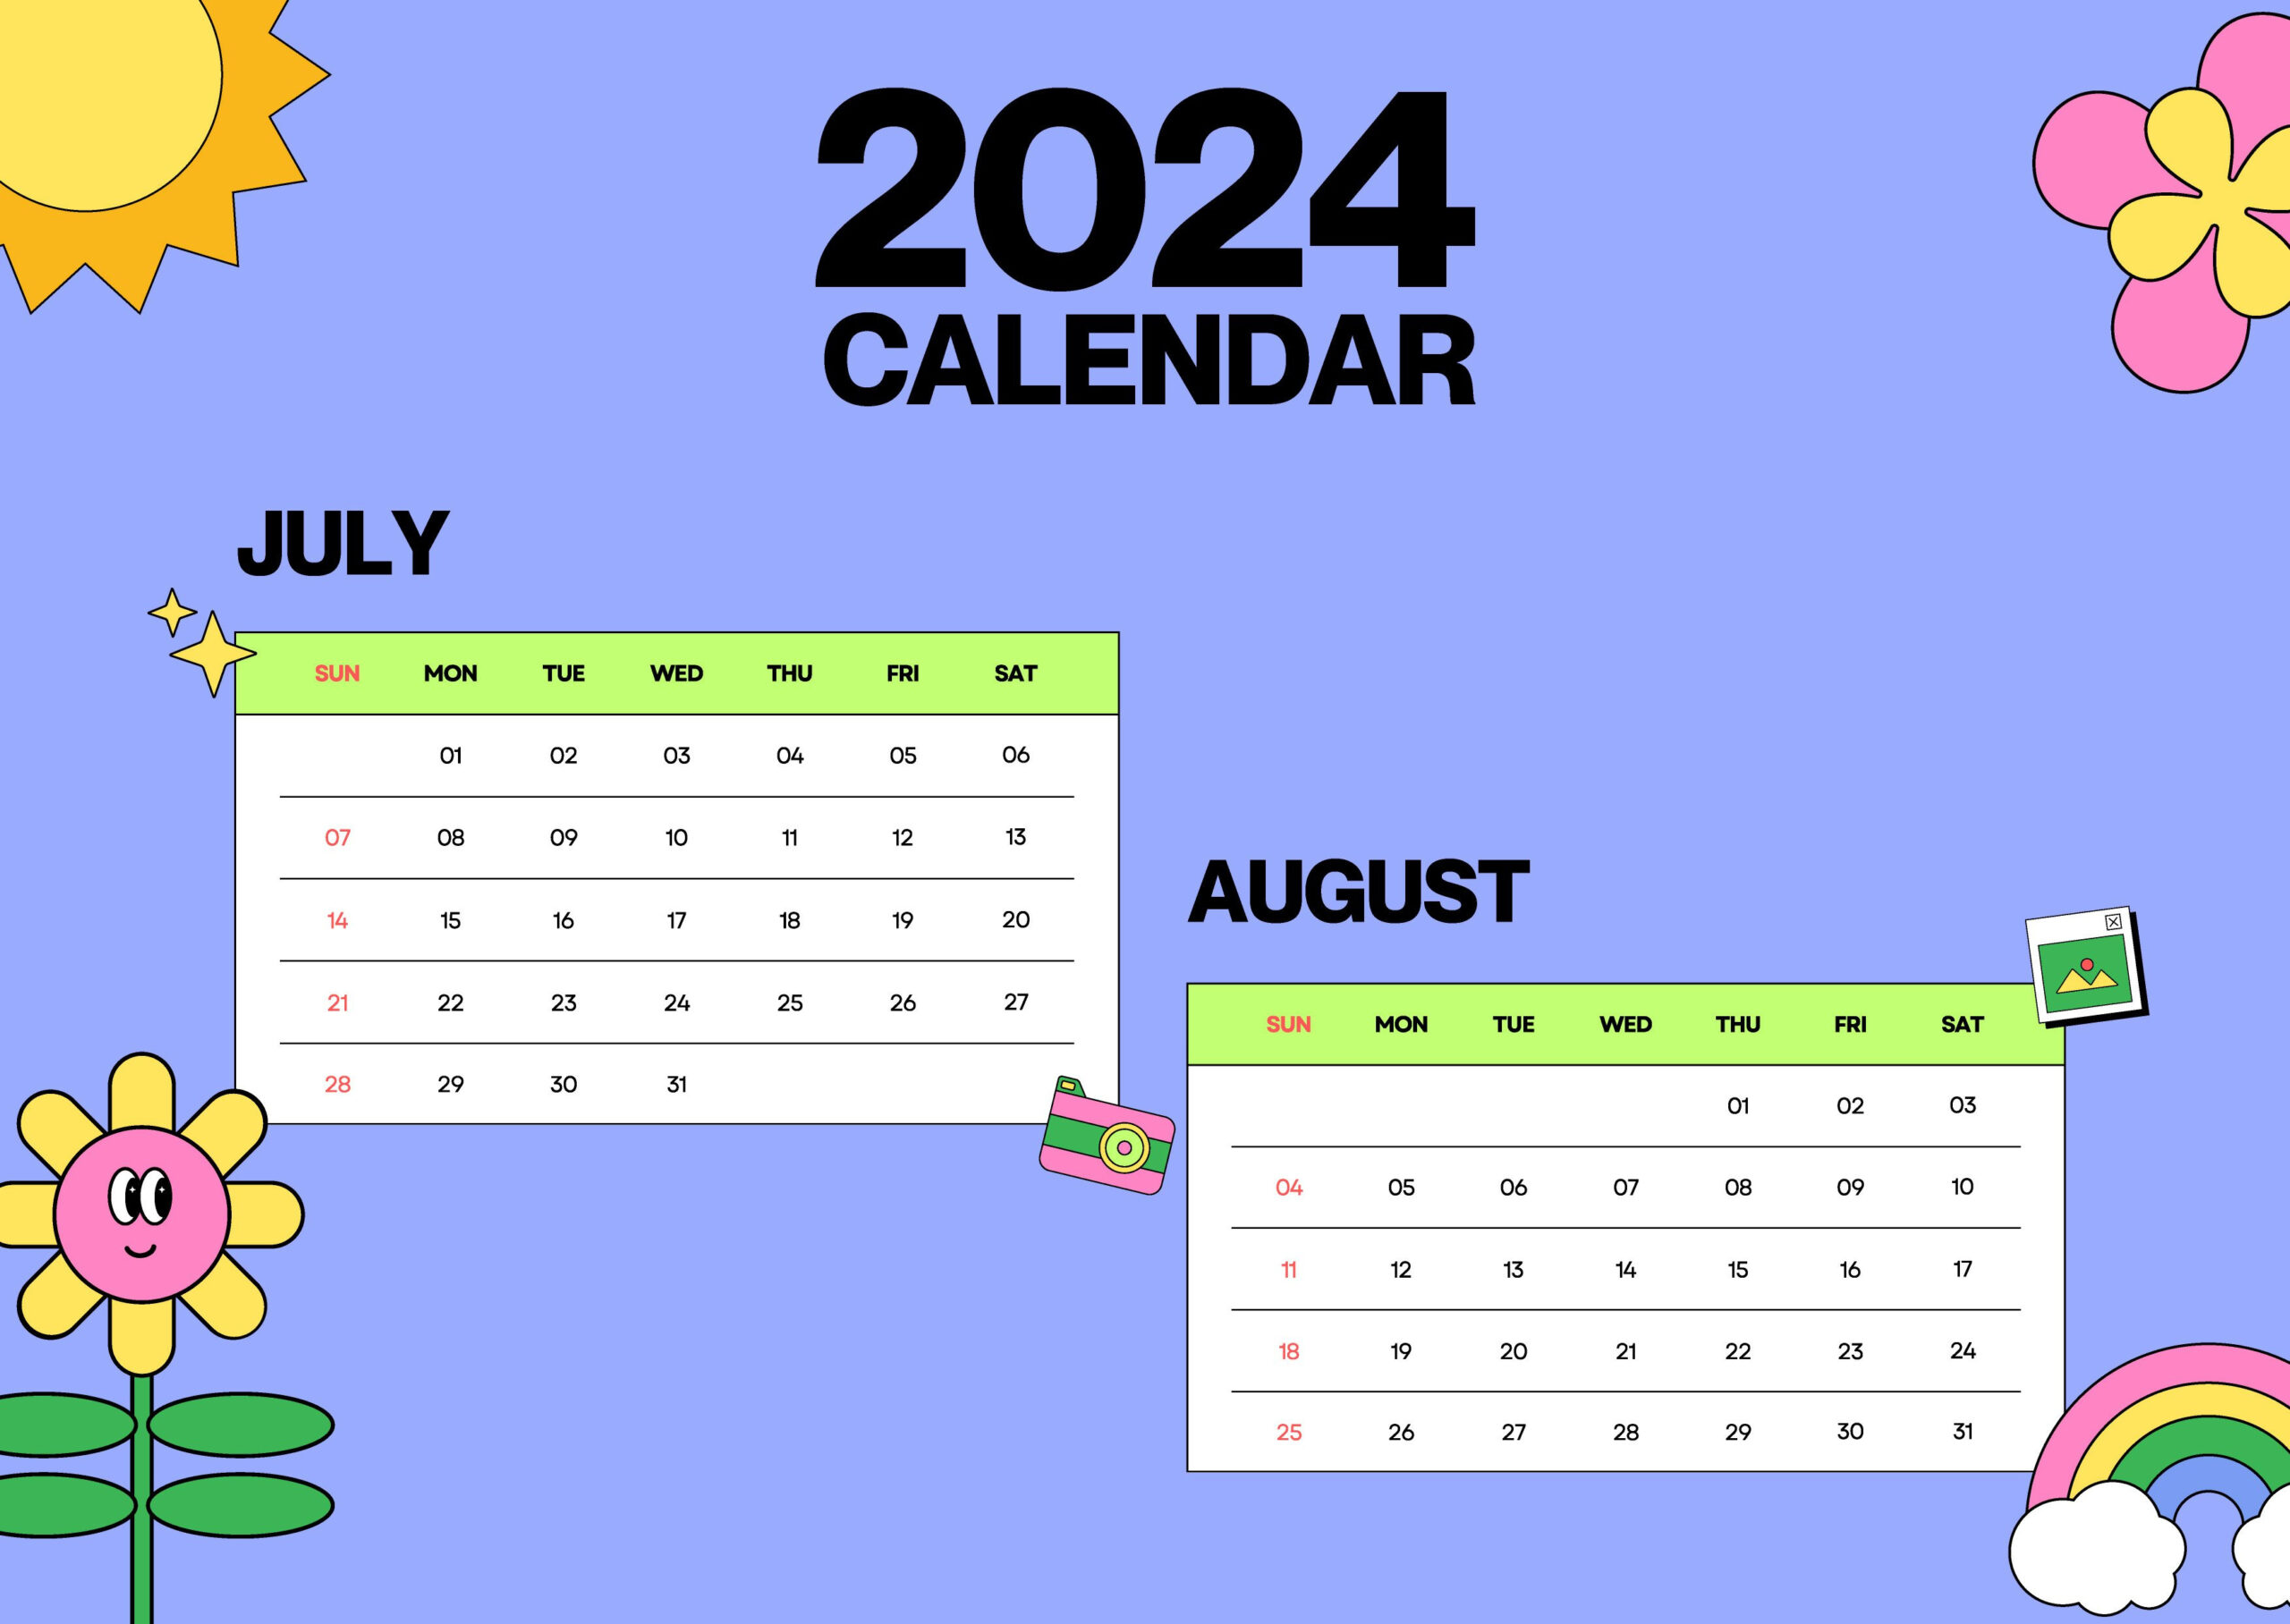 July August 2024 Calendar Template - Edit Online &amp;amp; Download with regard to Calendar 2024 July and August